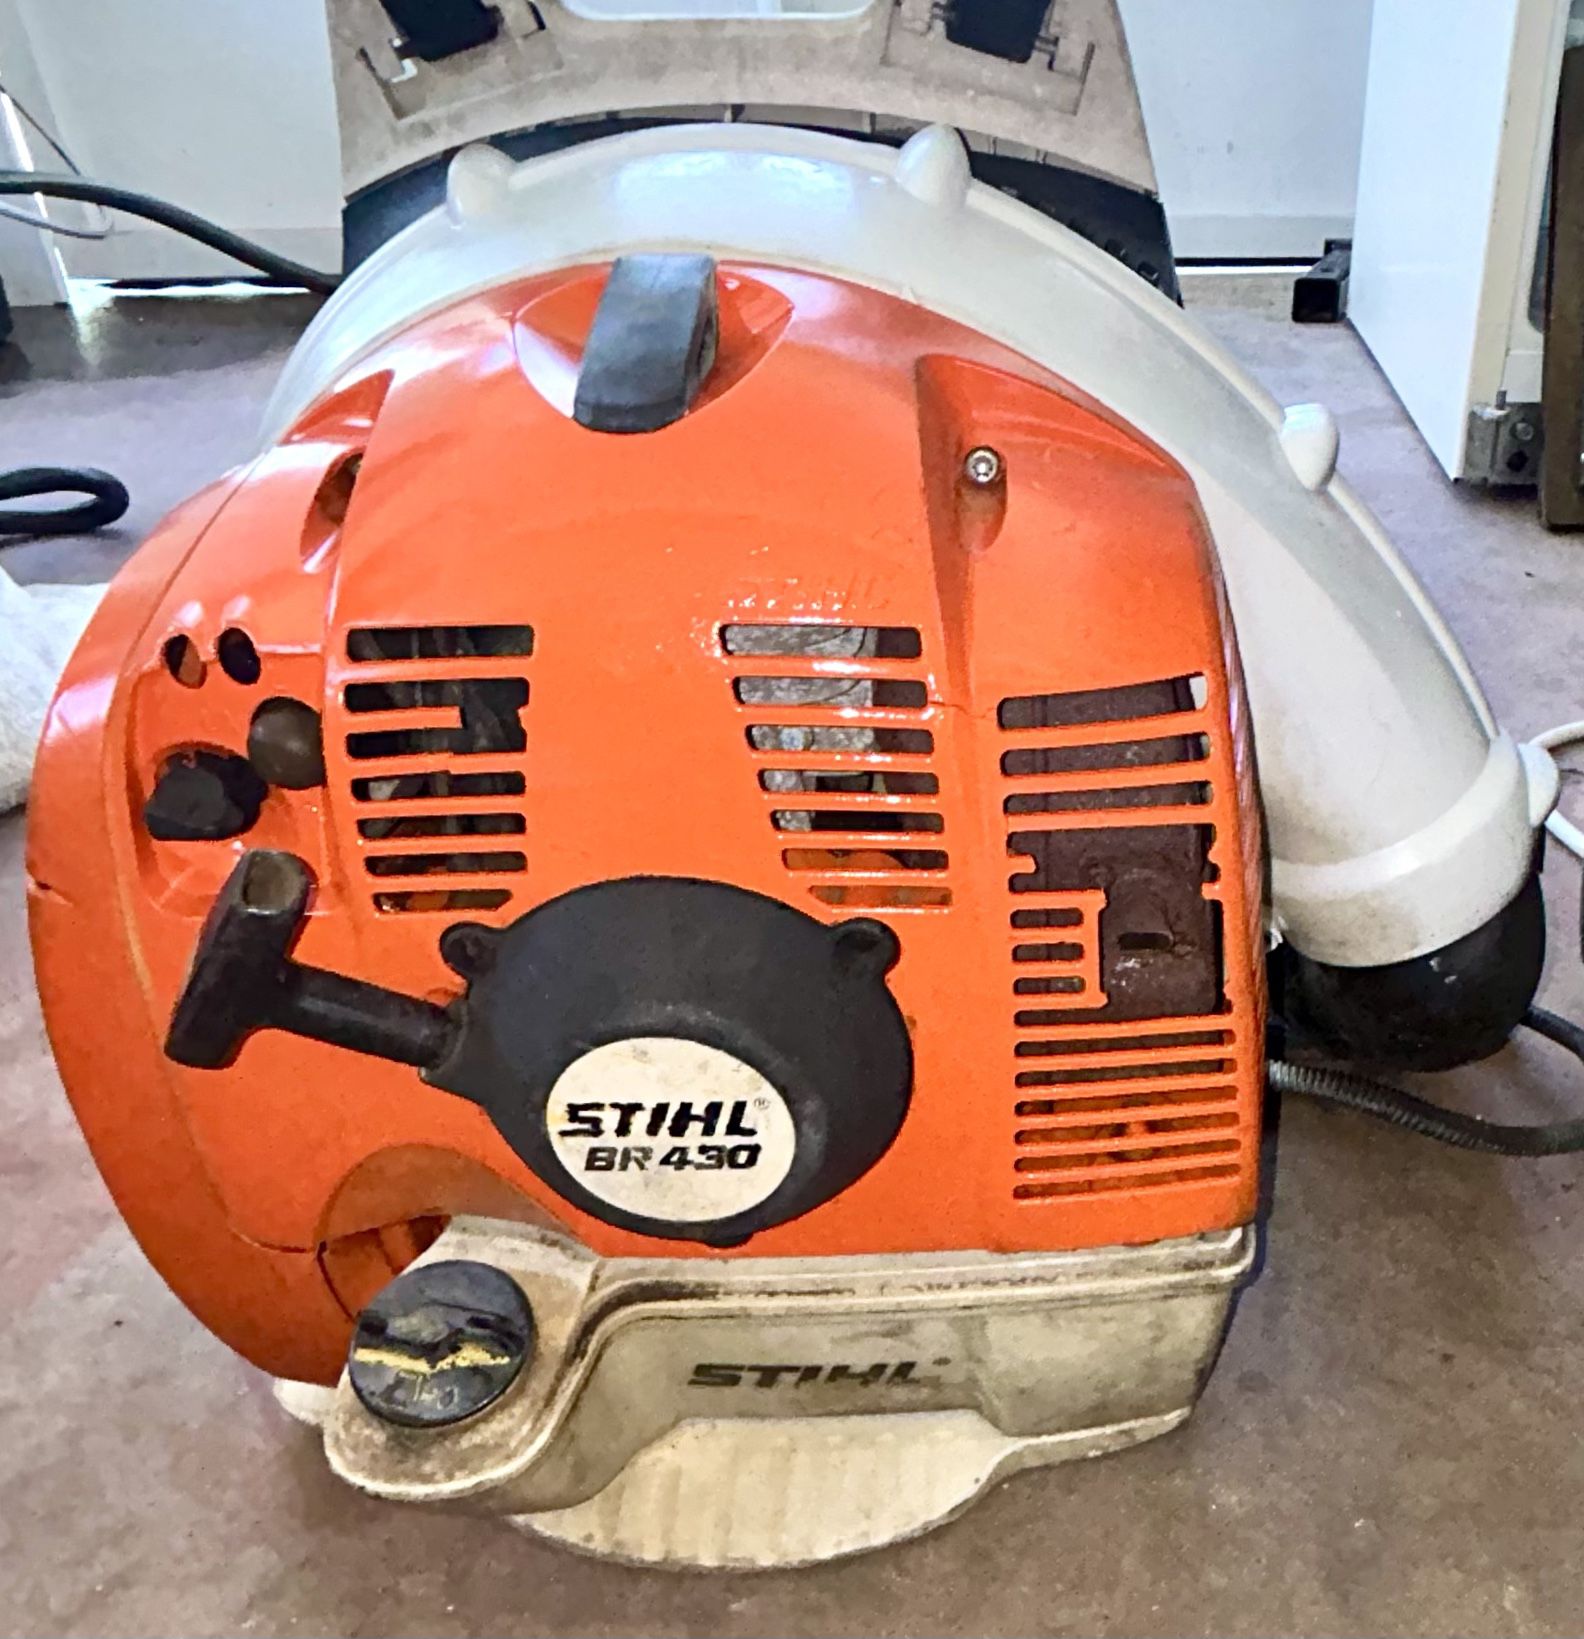 STIHL BR430 Commercial Backpack Blower  STARTS EASY  RUNS GREAT  NO ISSUES